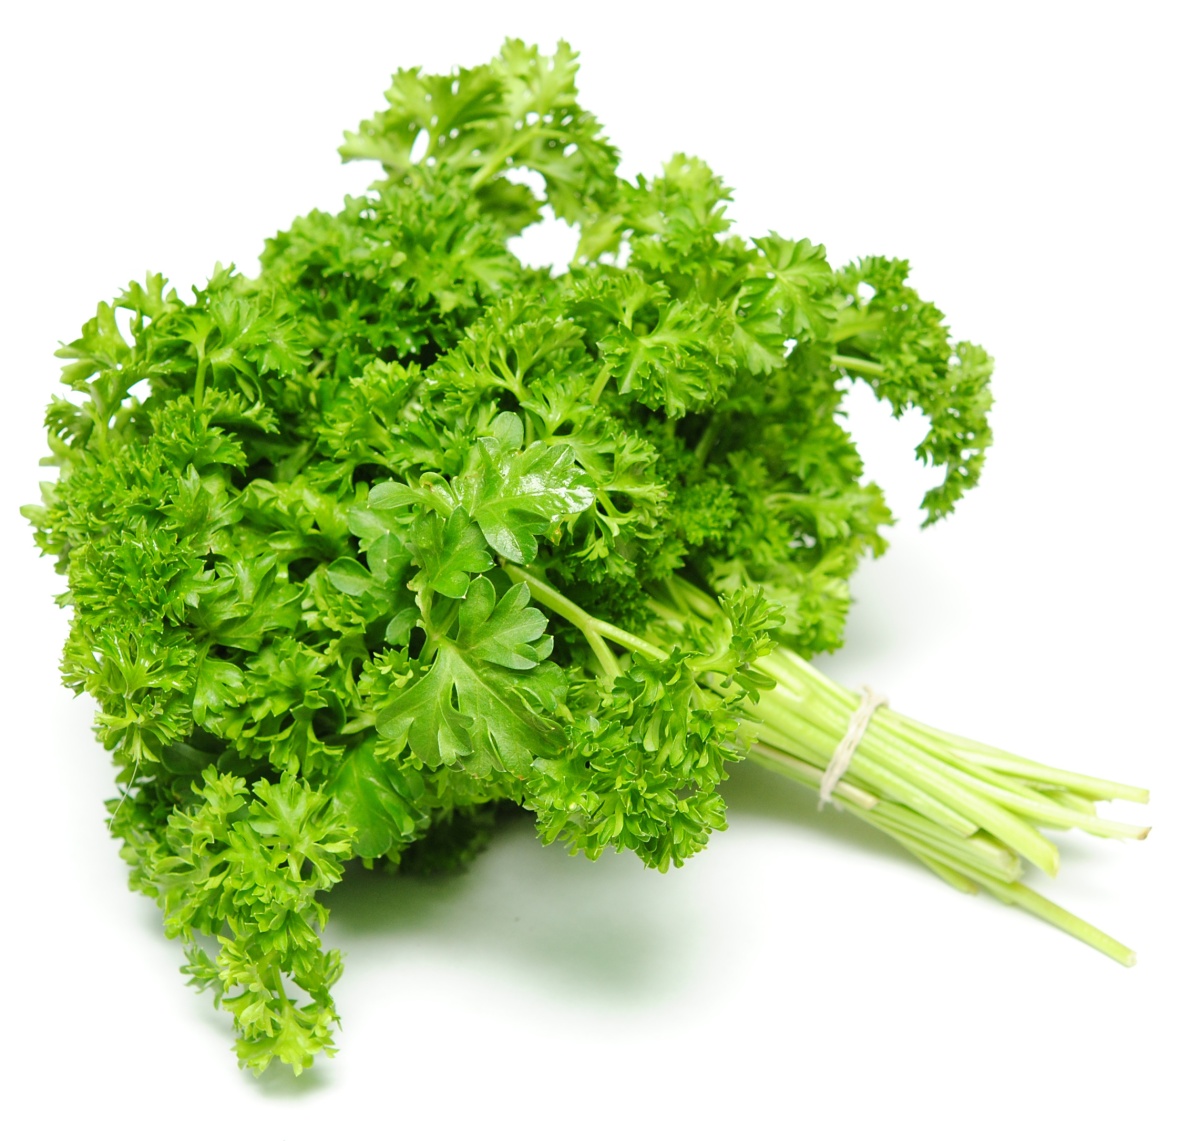 Parsley | thrivecoach12